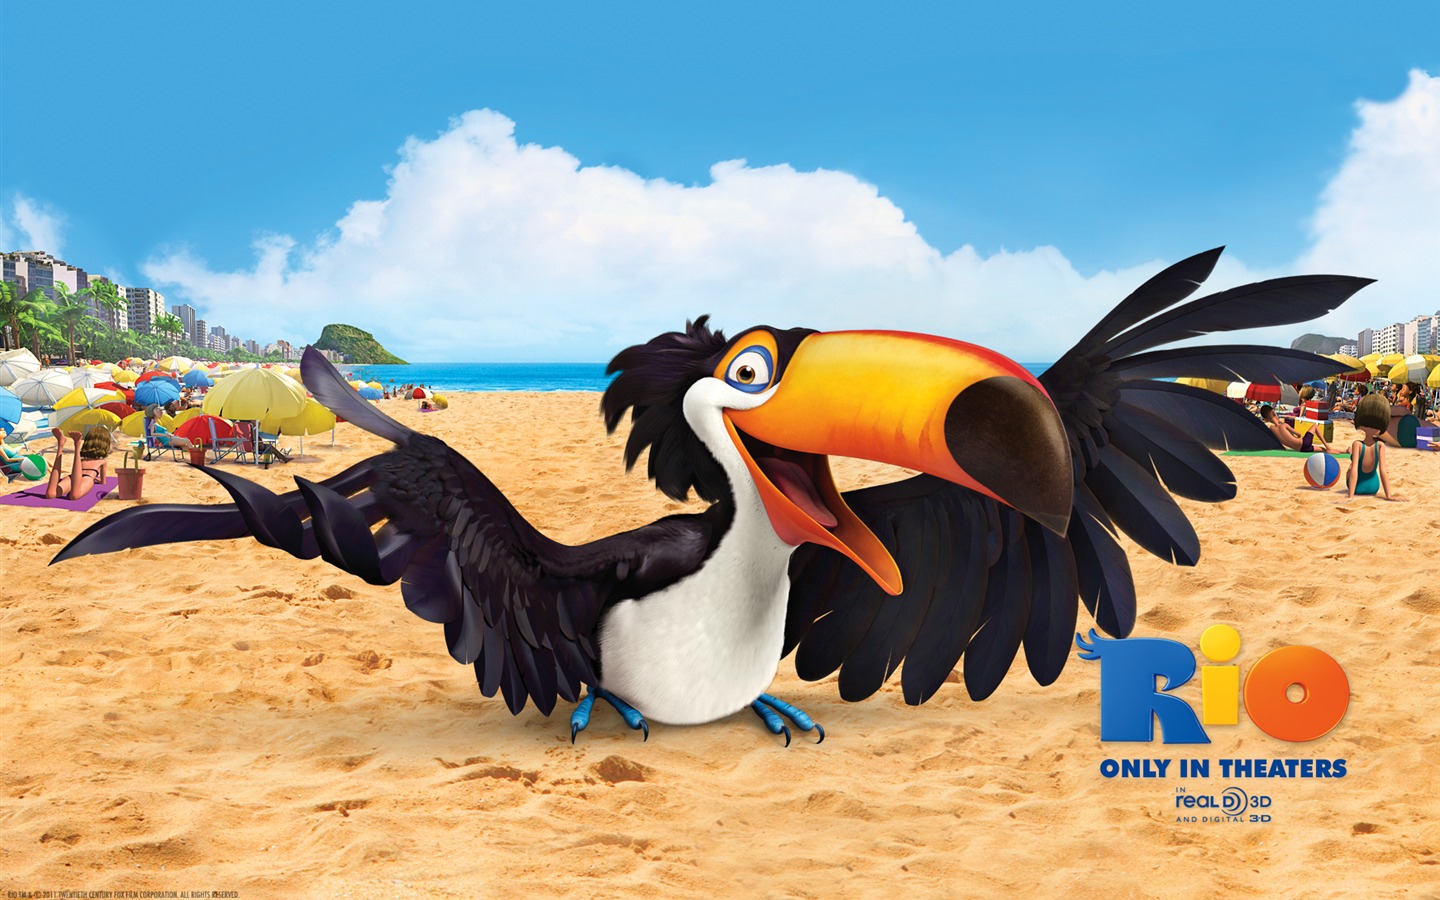 Rio 2011 wallpapers #17 - 1440x900